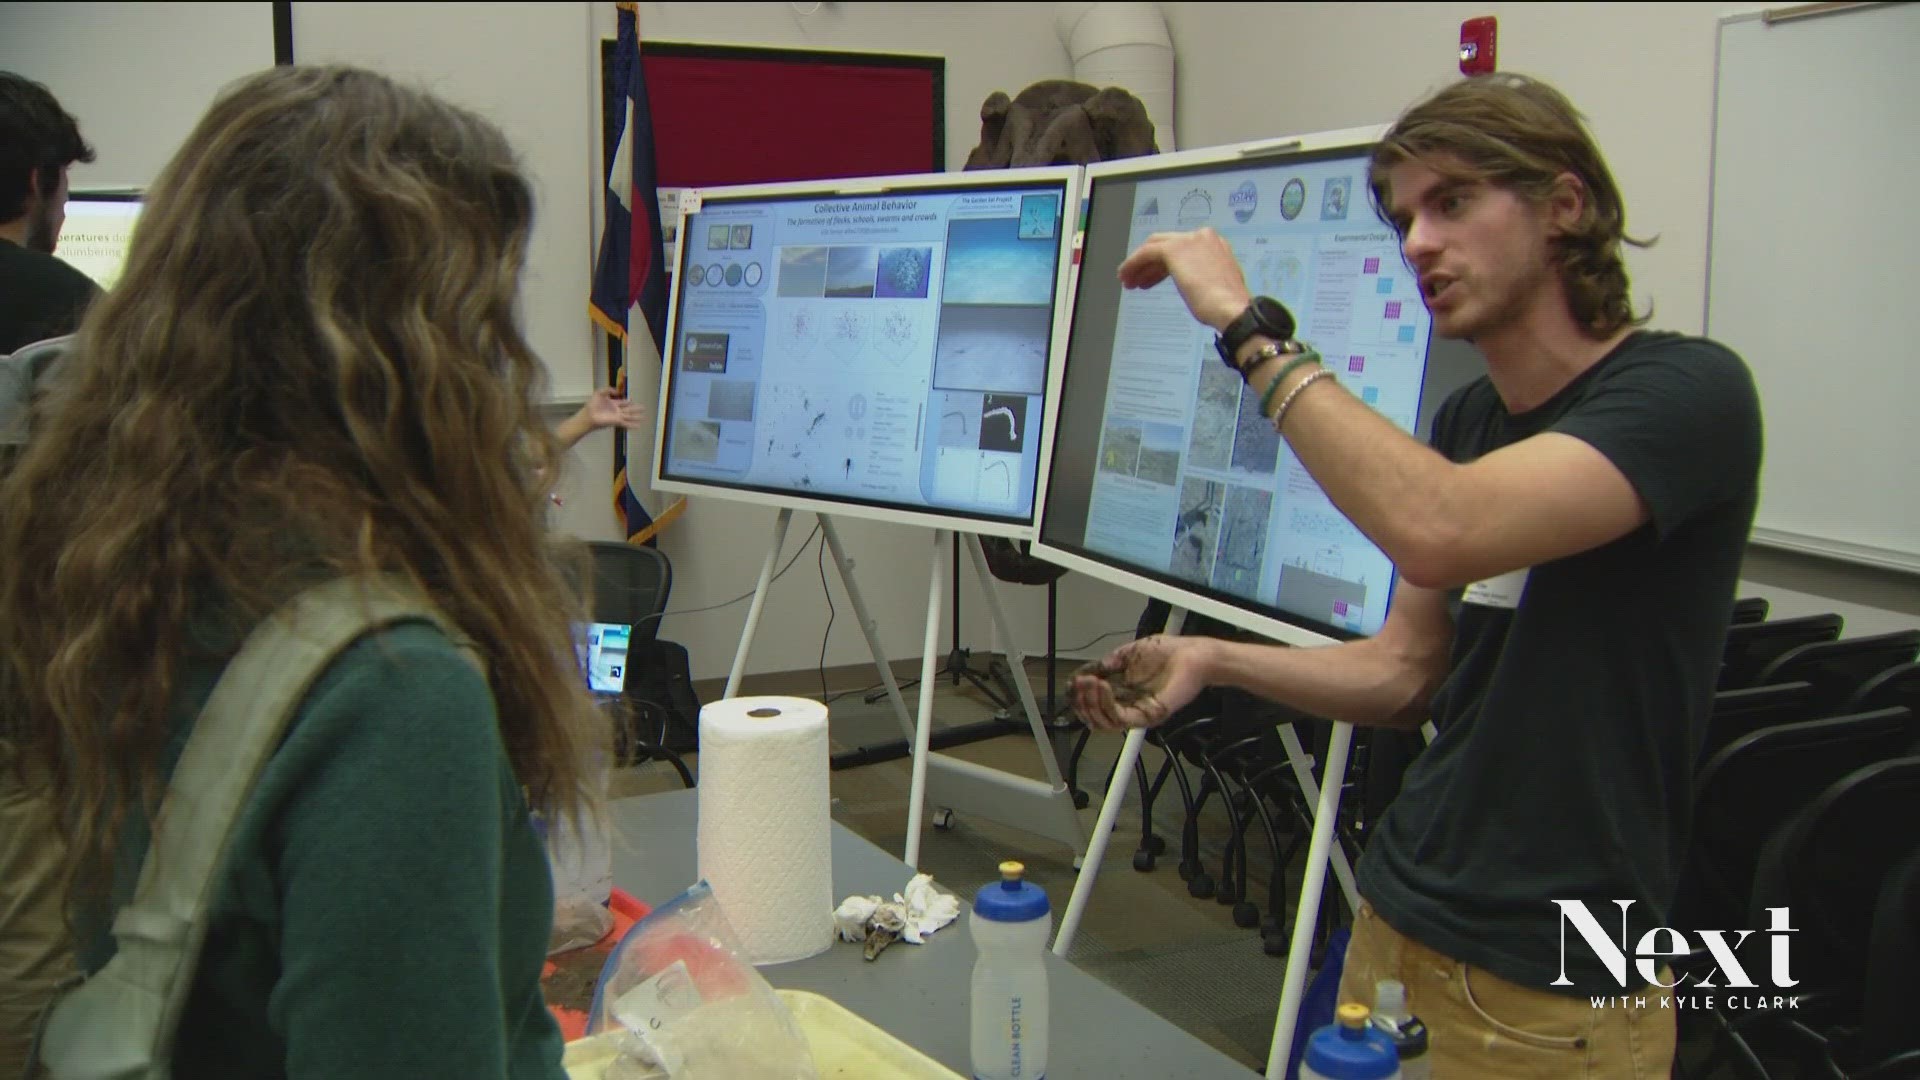 CU Boulder started their first-ever "Reverse Science Fair" to challenge their scientists and get high schoolers interested in STEM careers.